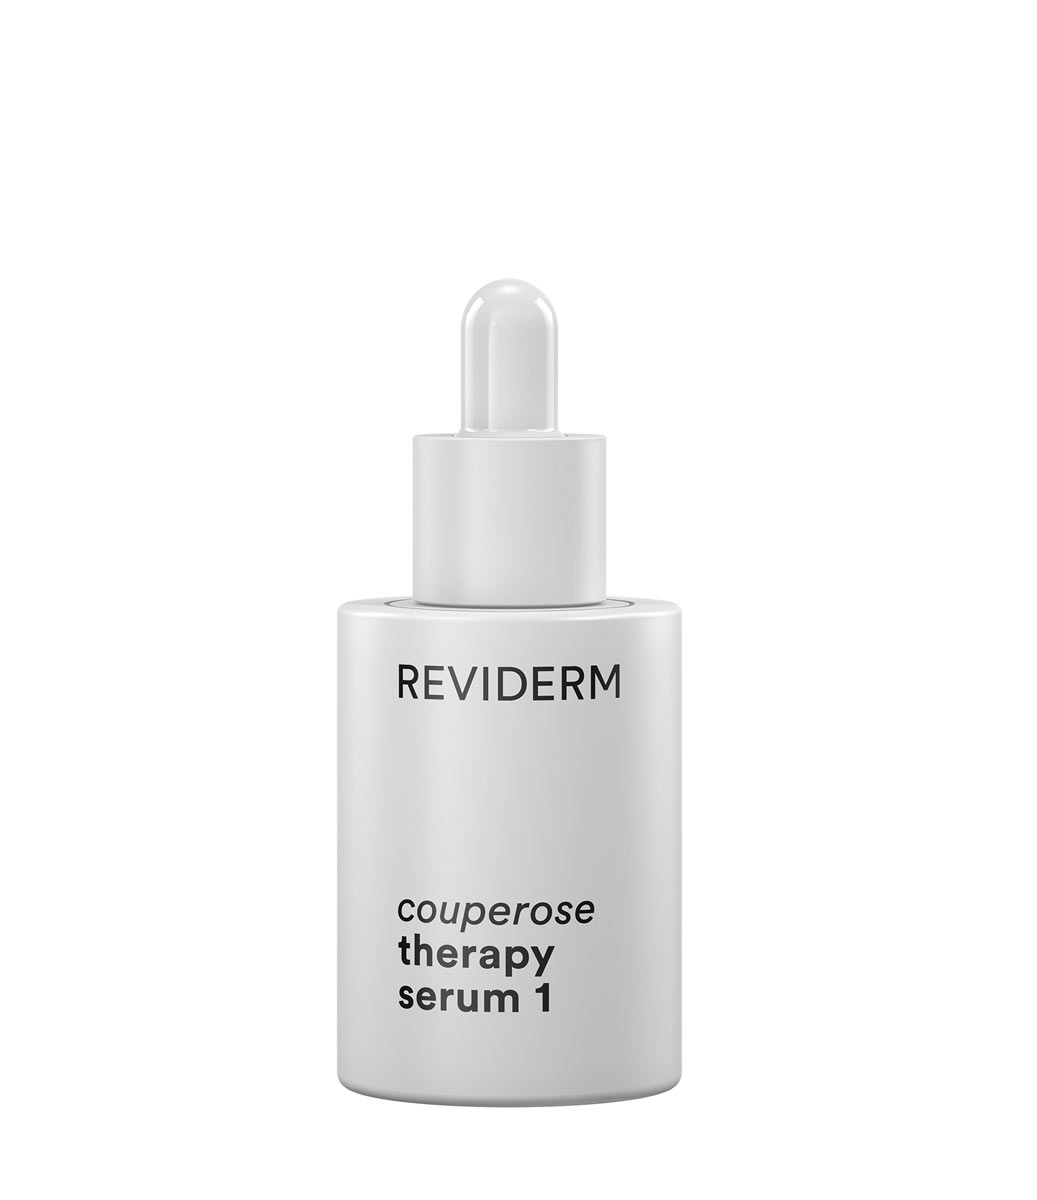 couperose therapy serum 1